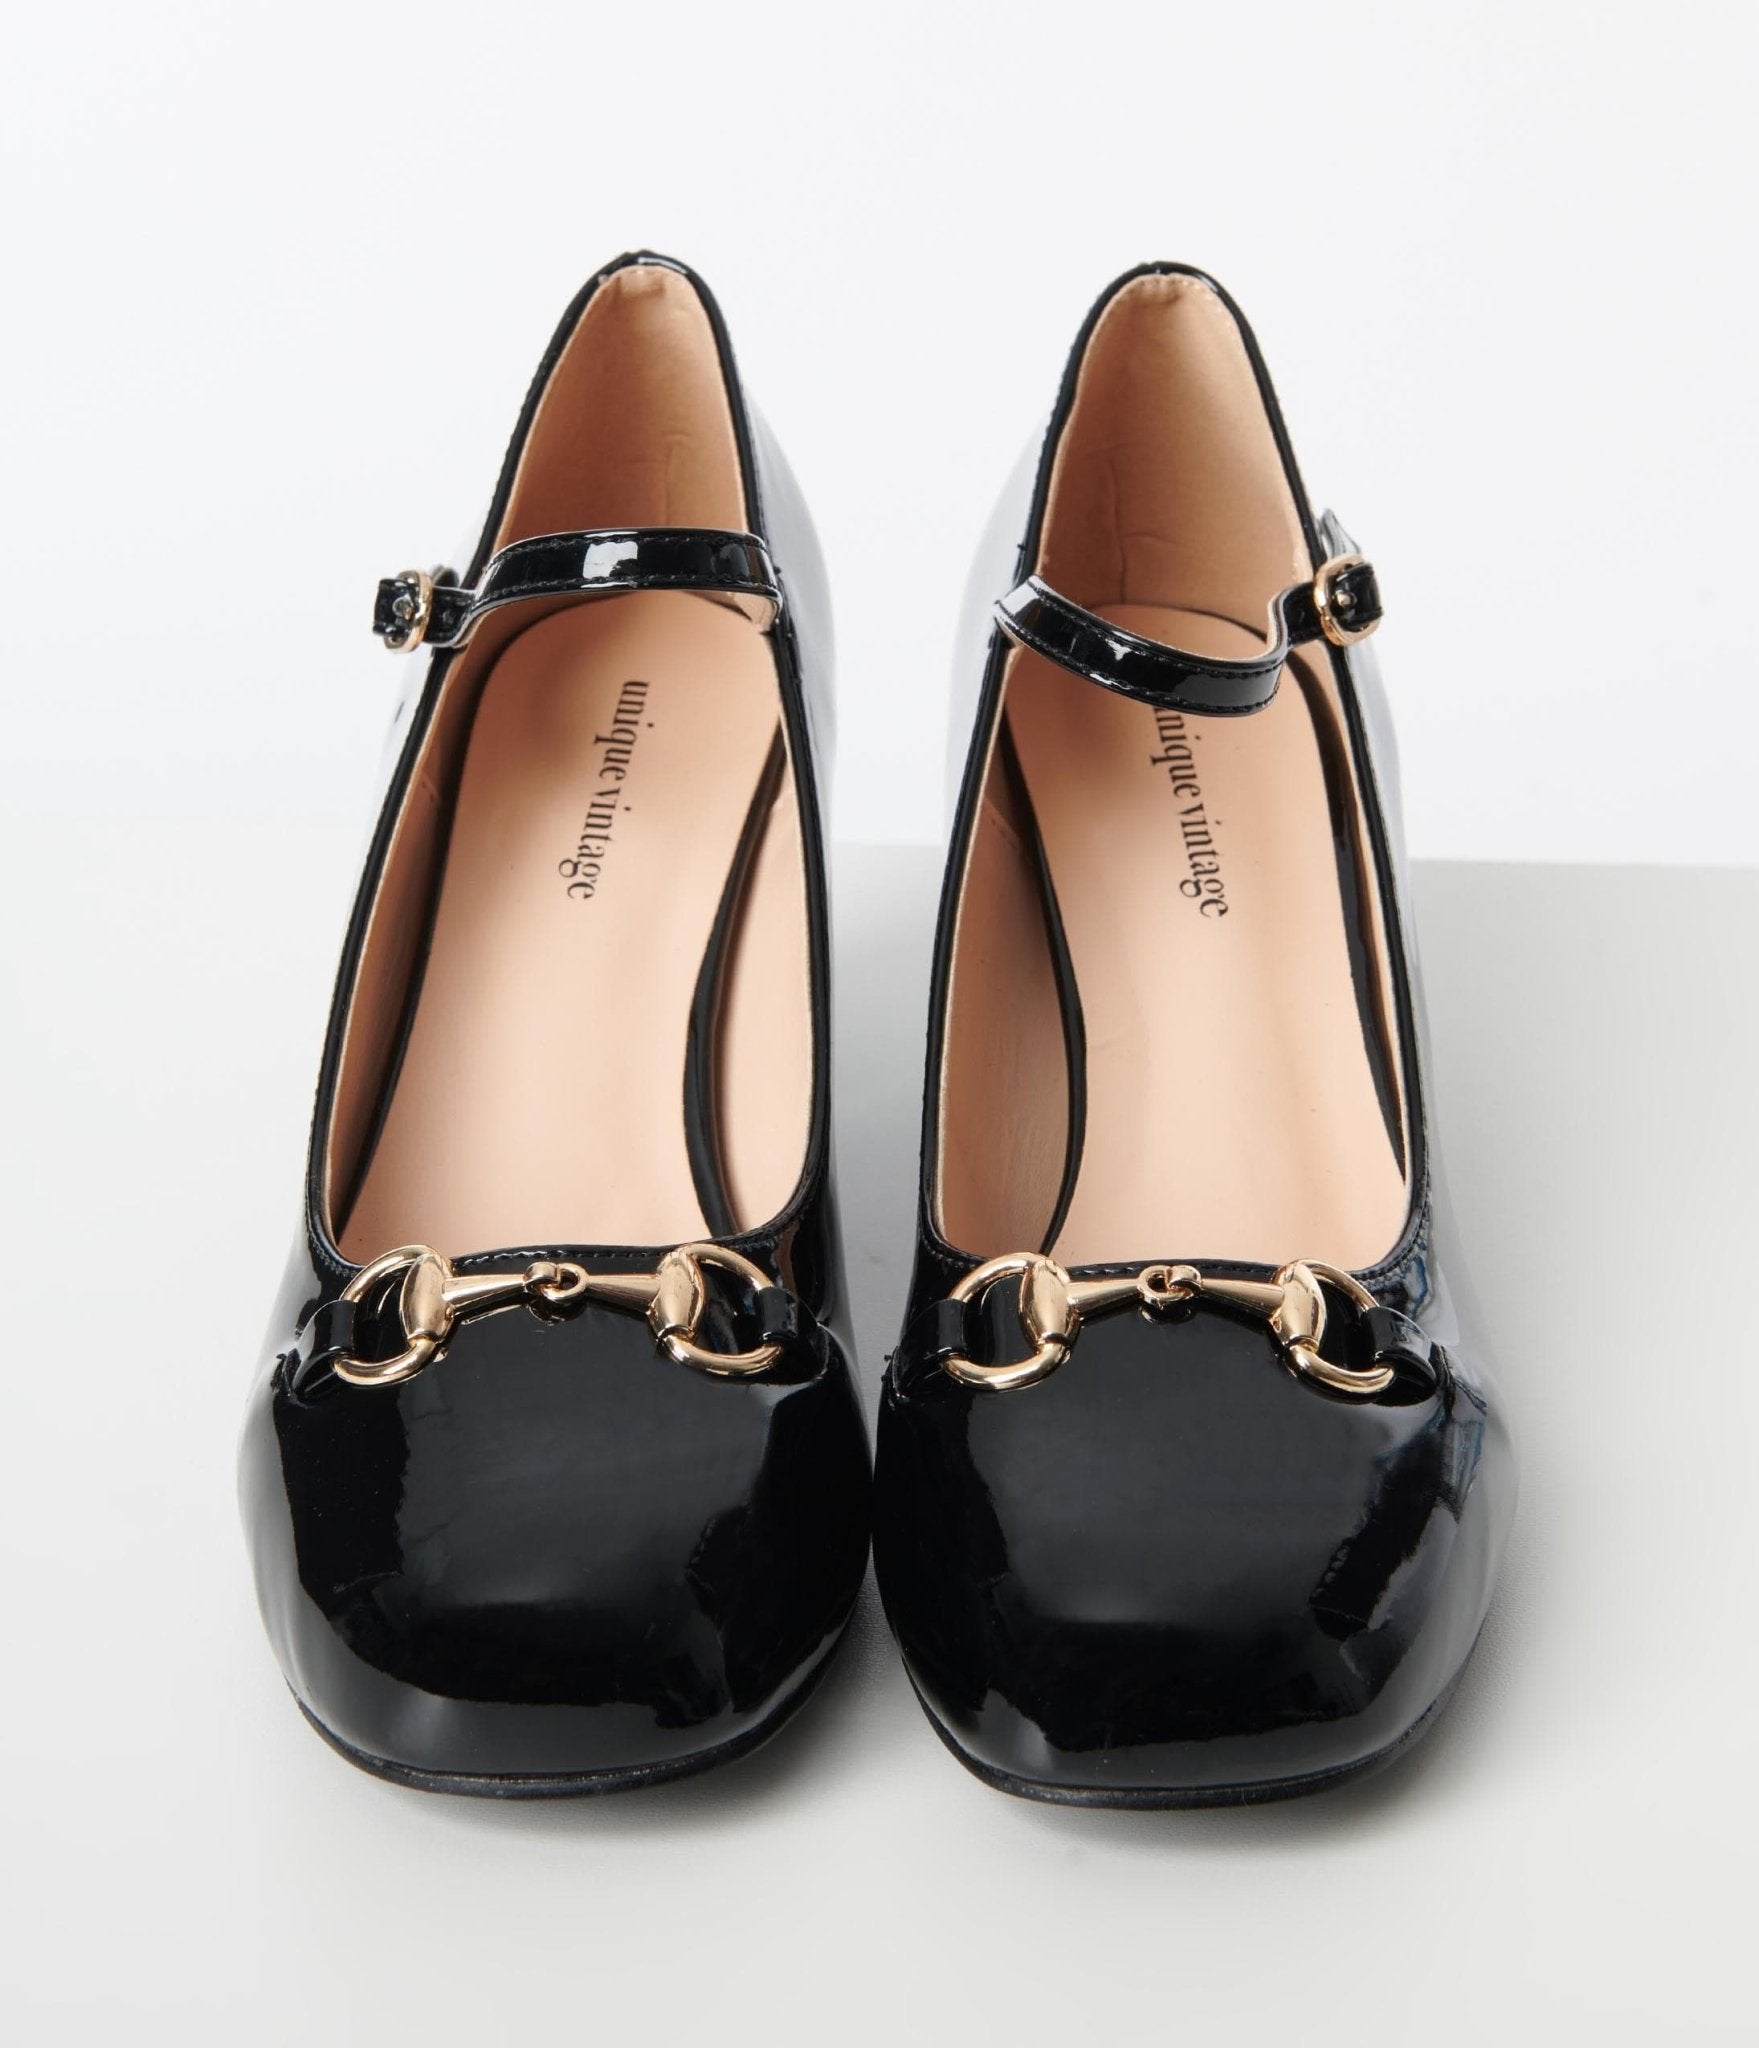 London Rag Black Millenial Bug Patent High Heeled Mary Jane Shoes Loafers  For Women - Buy London Rag Black Millenial Bug Patent High Heeled Mary Jane  Shoes Loafers For Women Online at